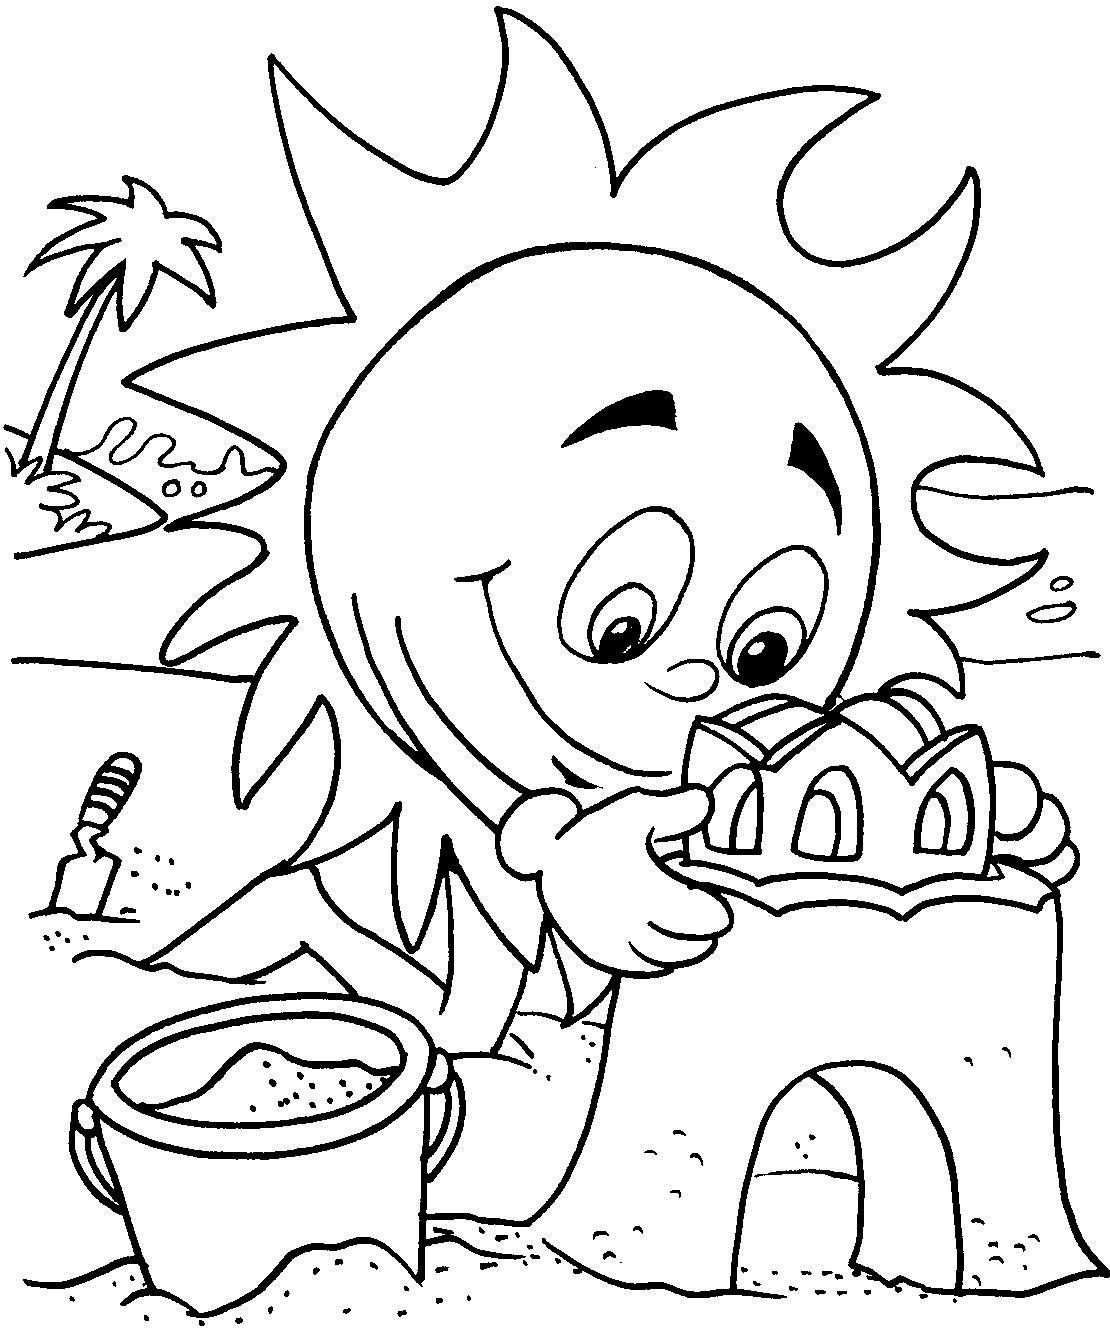 For Kids In The Summerbfa9 Coloring Page